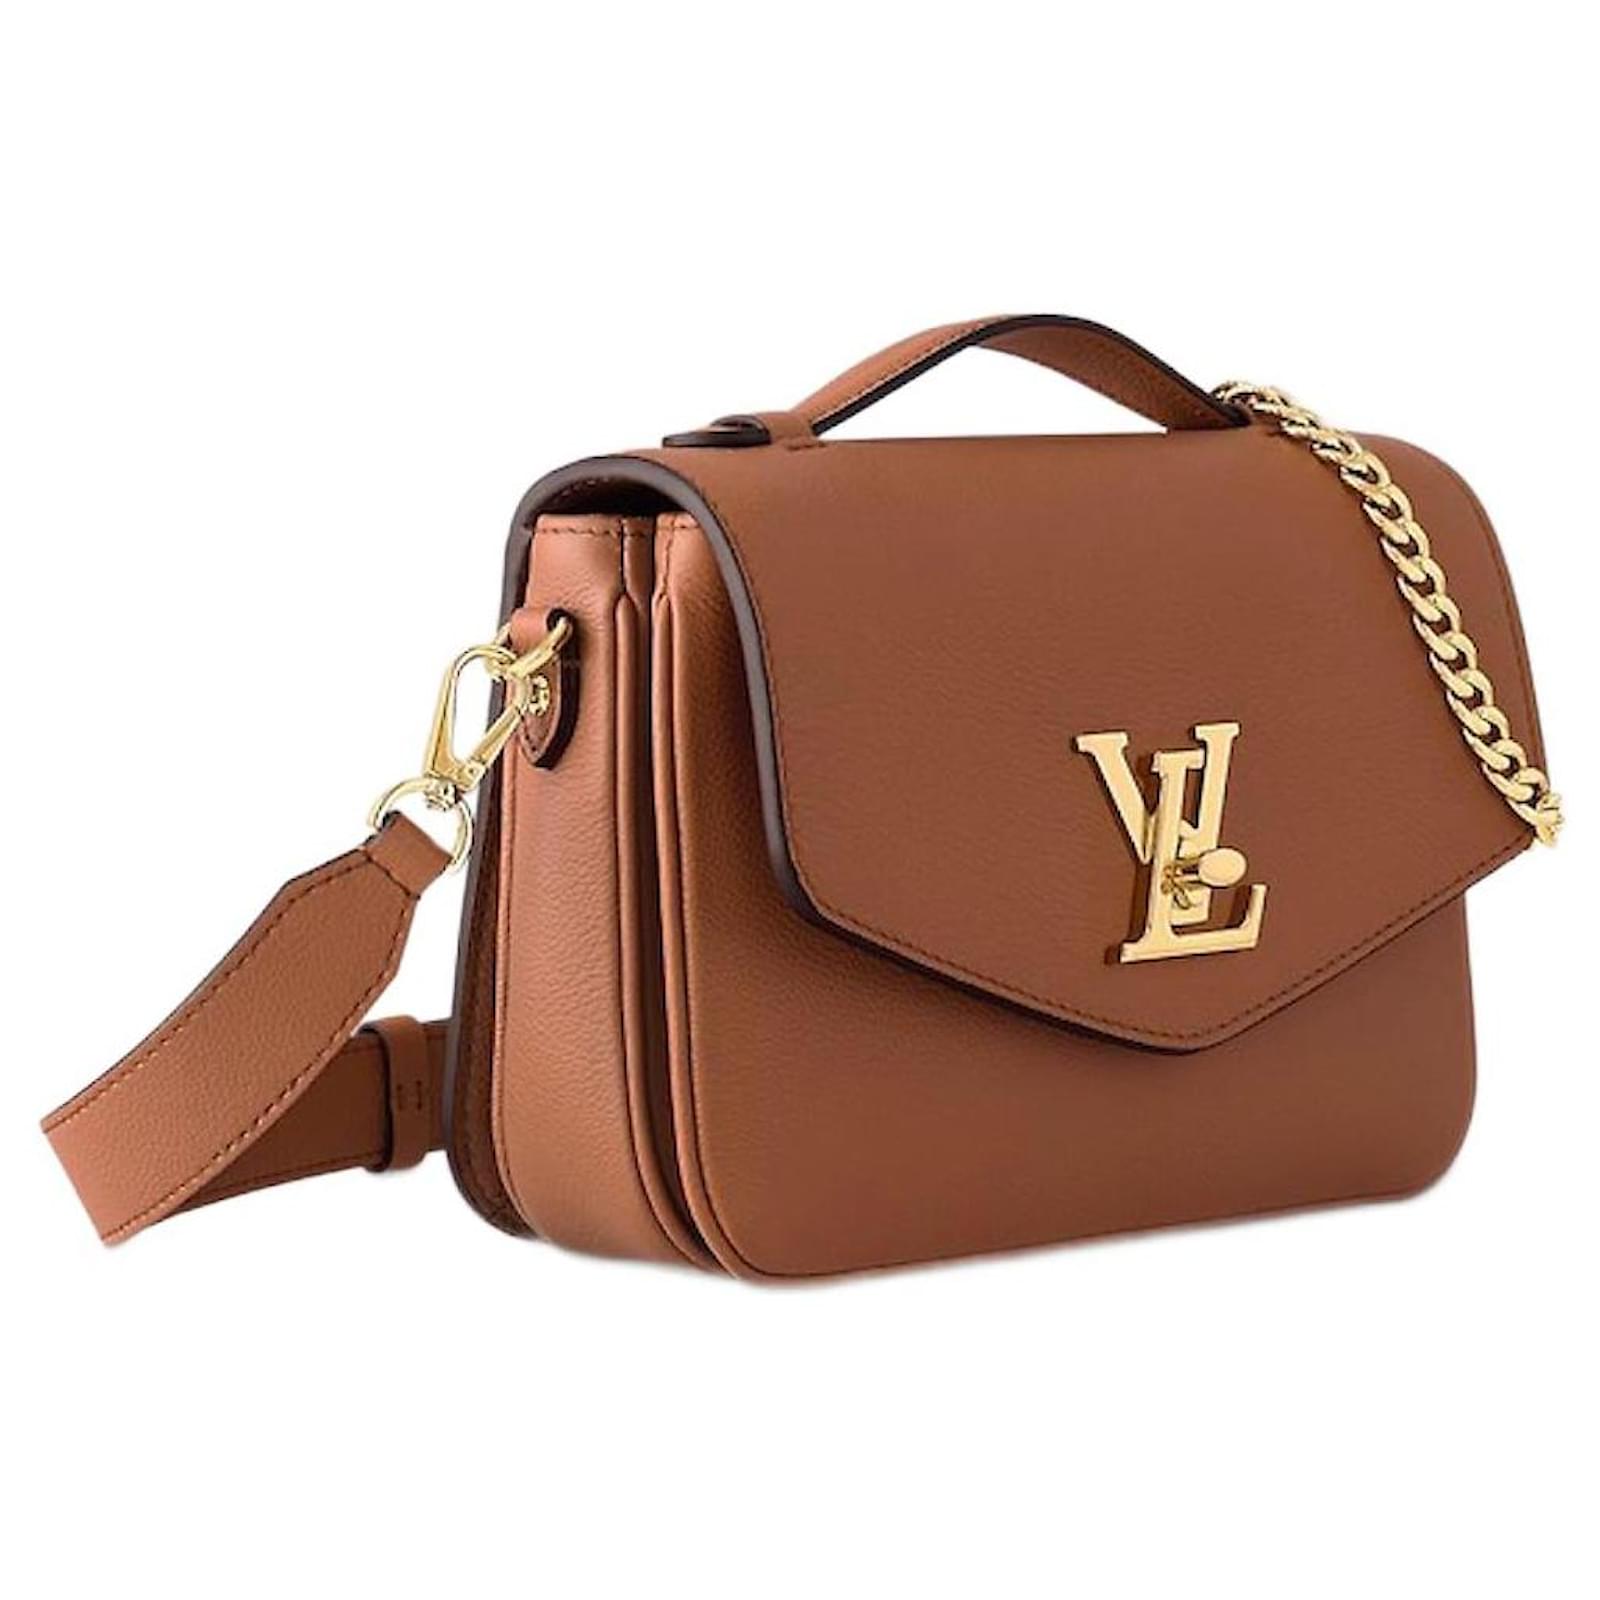 LOUIS VUITTON LV Handbag New With Tags Limited Edition Designer